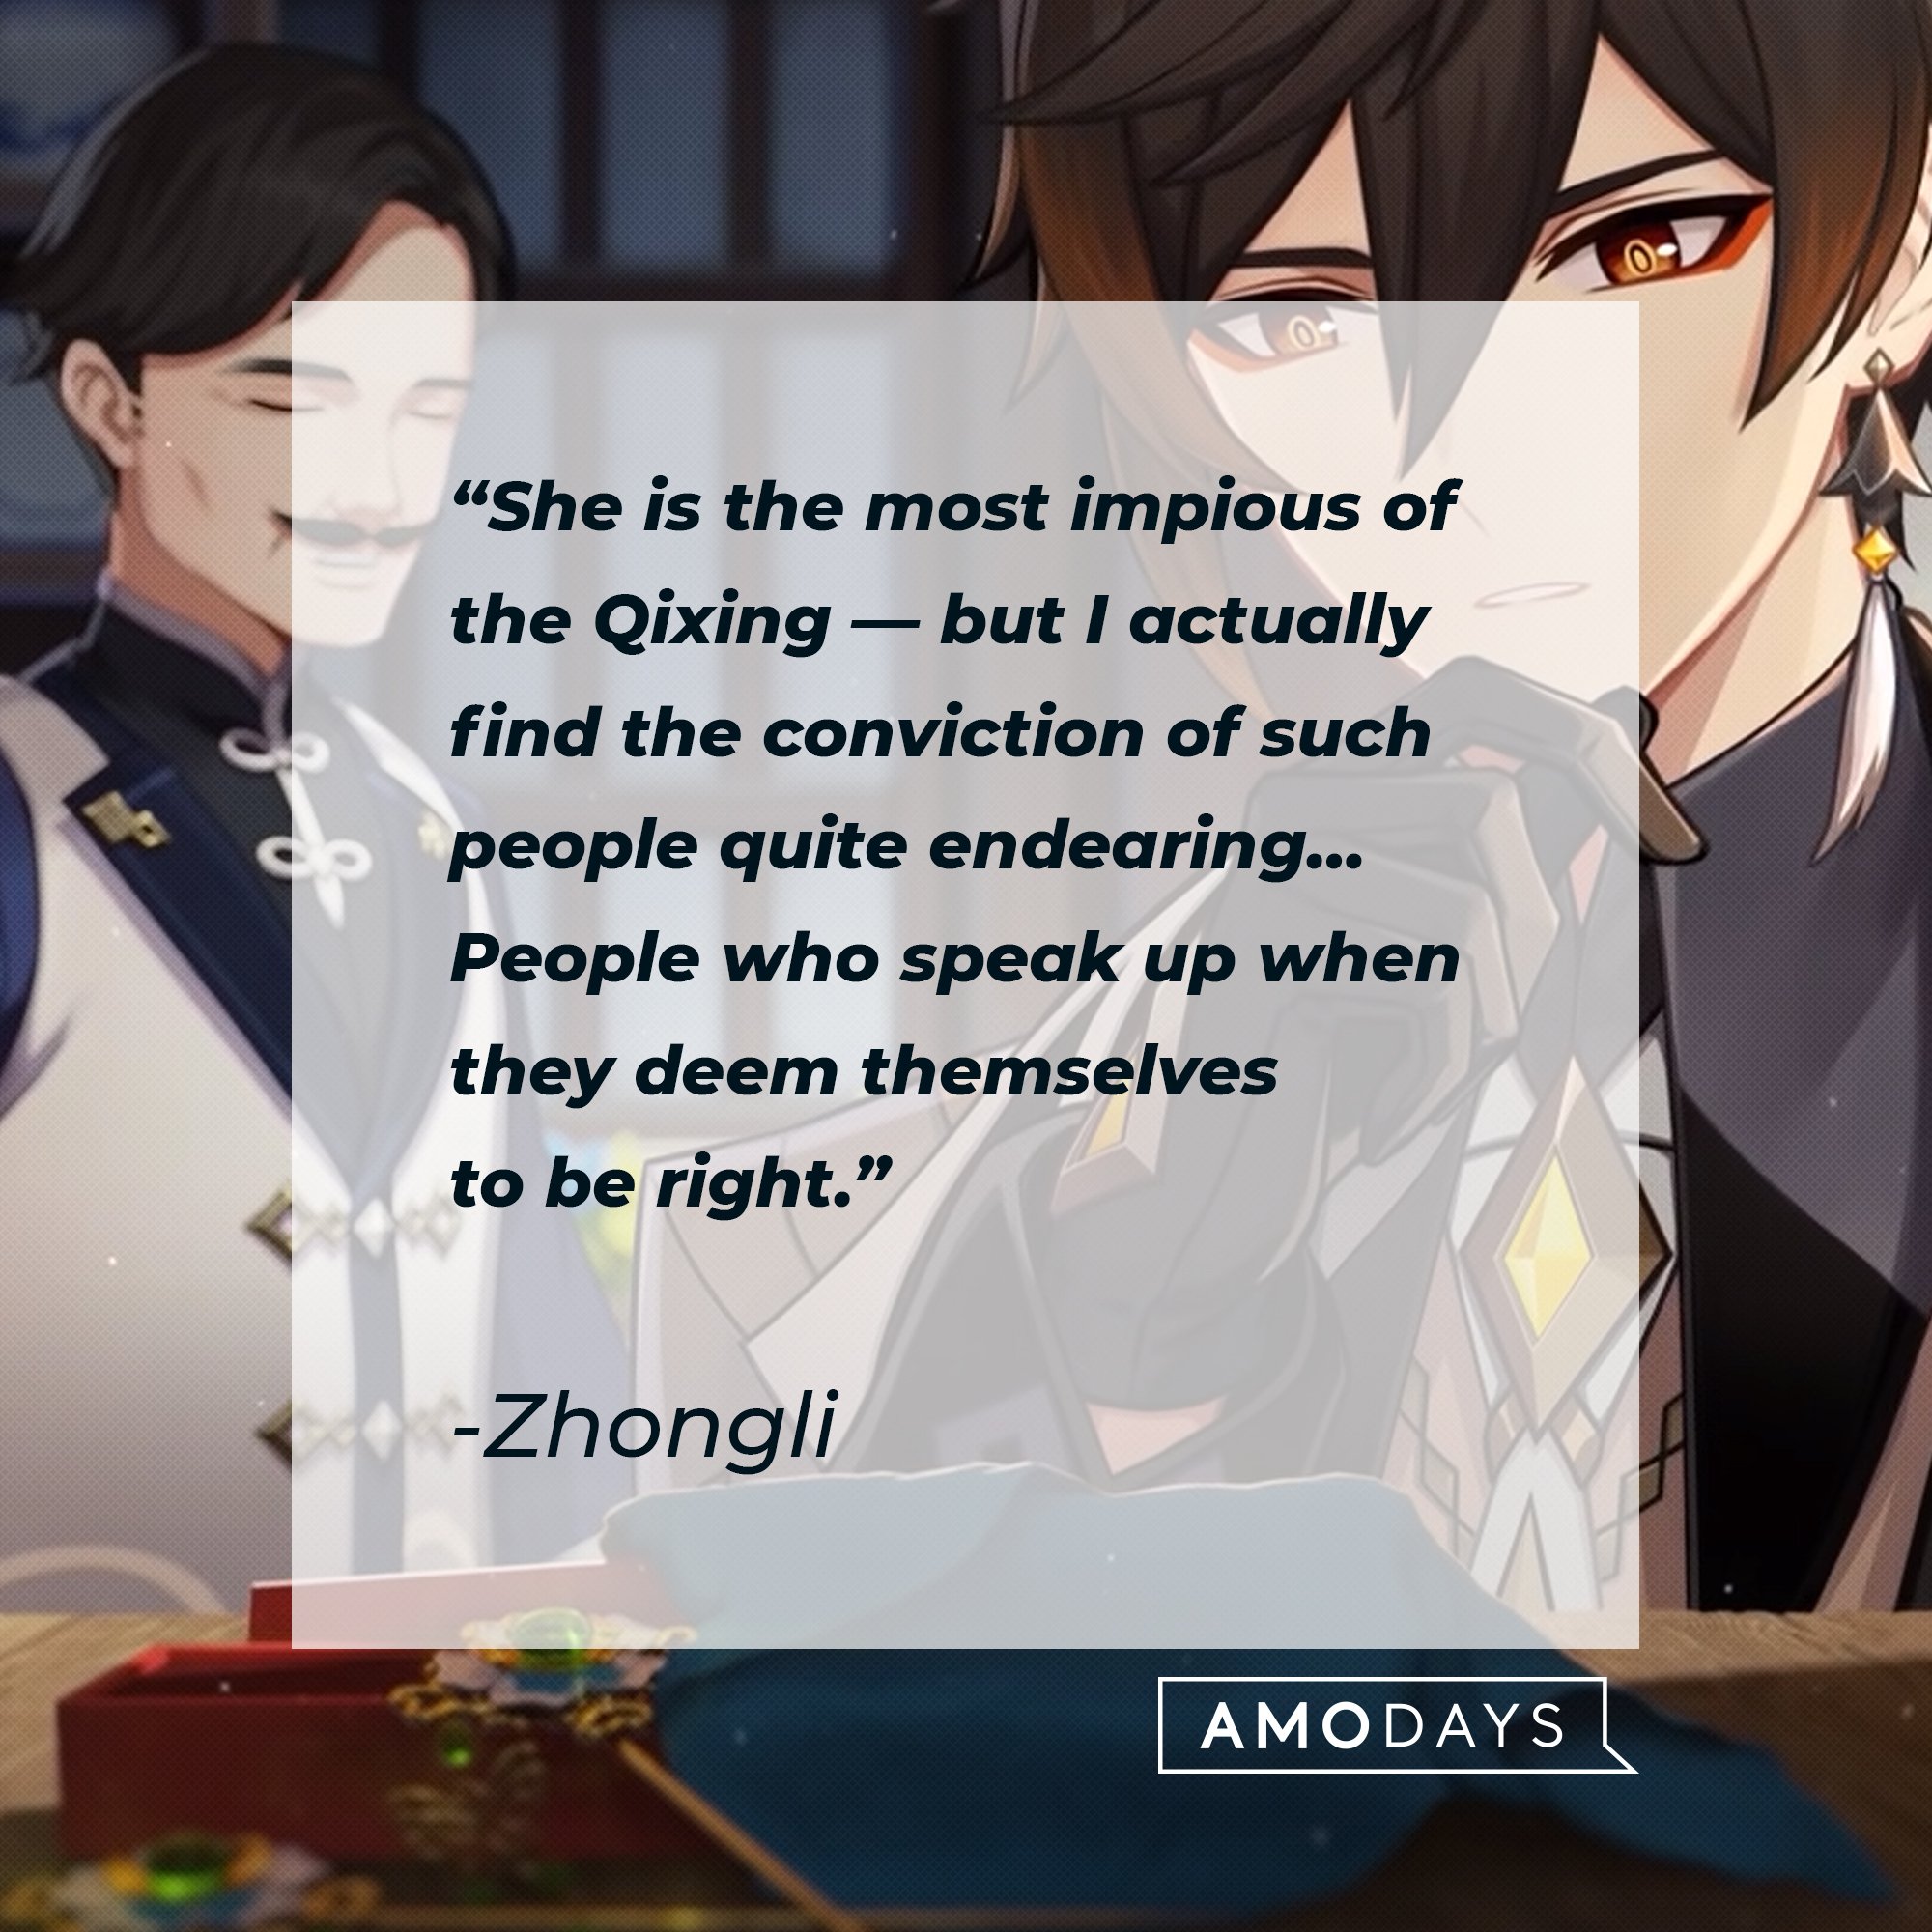 Zhongli’s quote: "She is the most impious of the Qixing — but I actually find the conviction of such people quite endearing…People who speak up when they deem themselves to be right." | Image: AmoDays